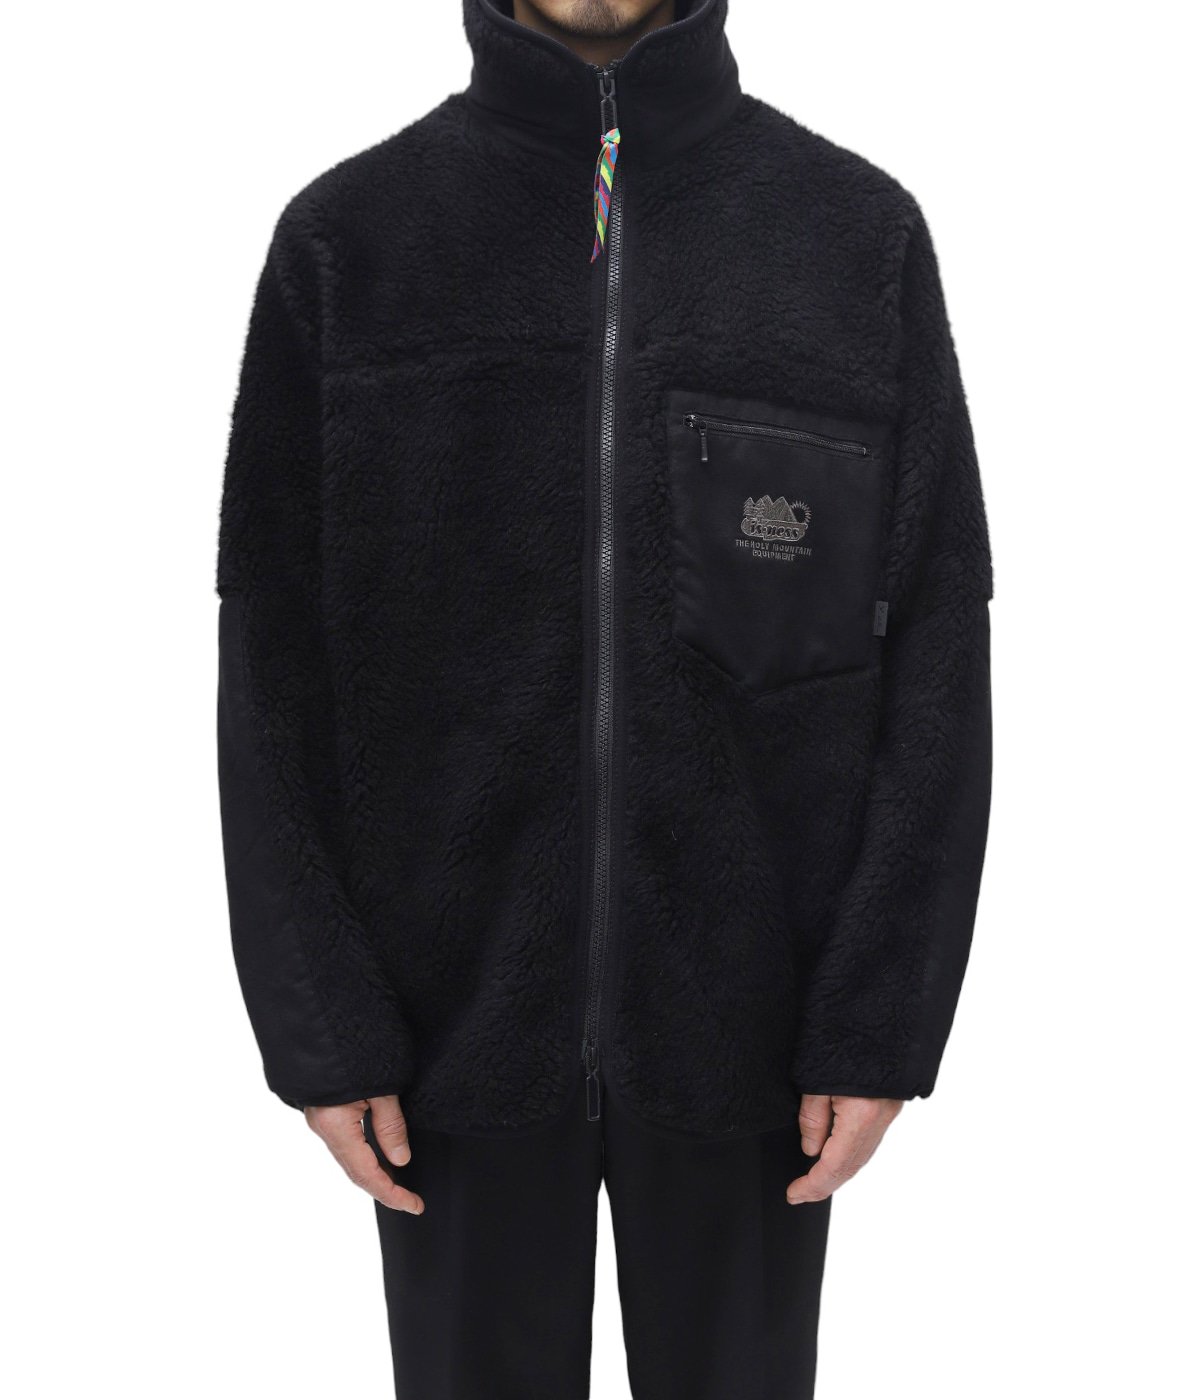 THM FLEECE JACKET is-ness×Y(dot)BY NORDISK | is-ness(イズネス